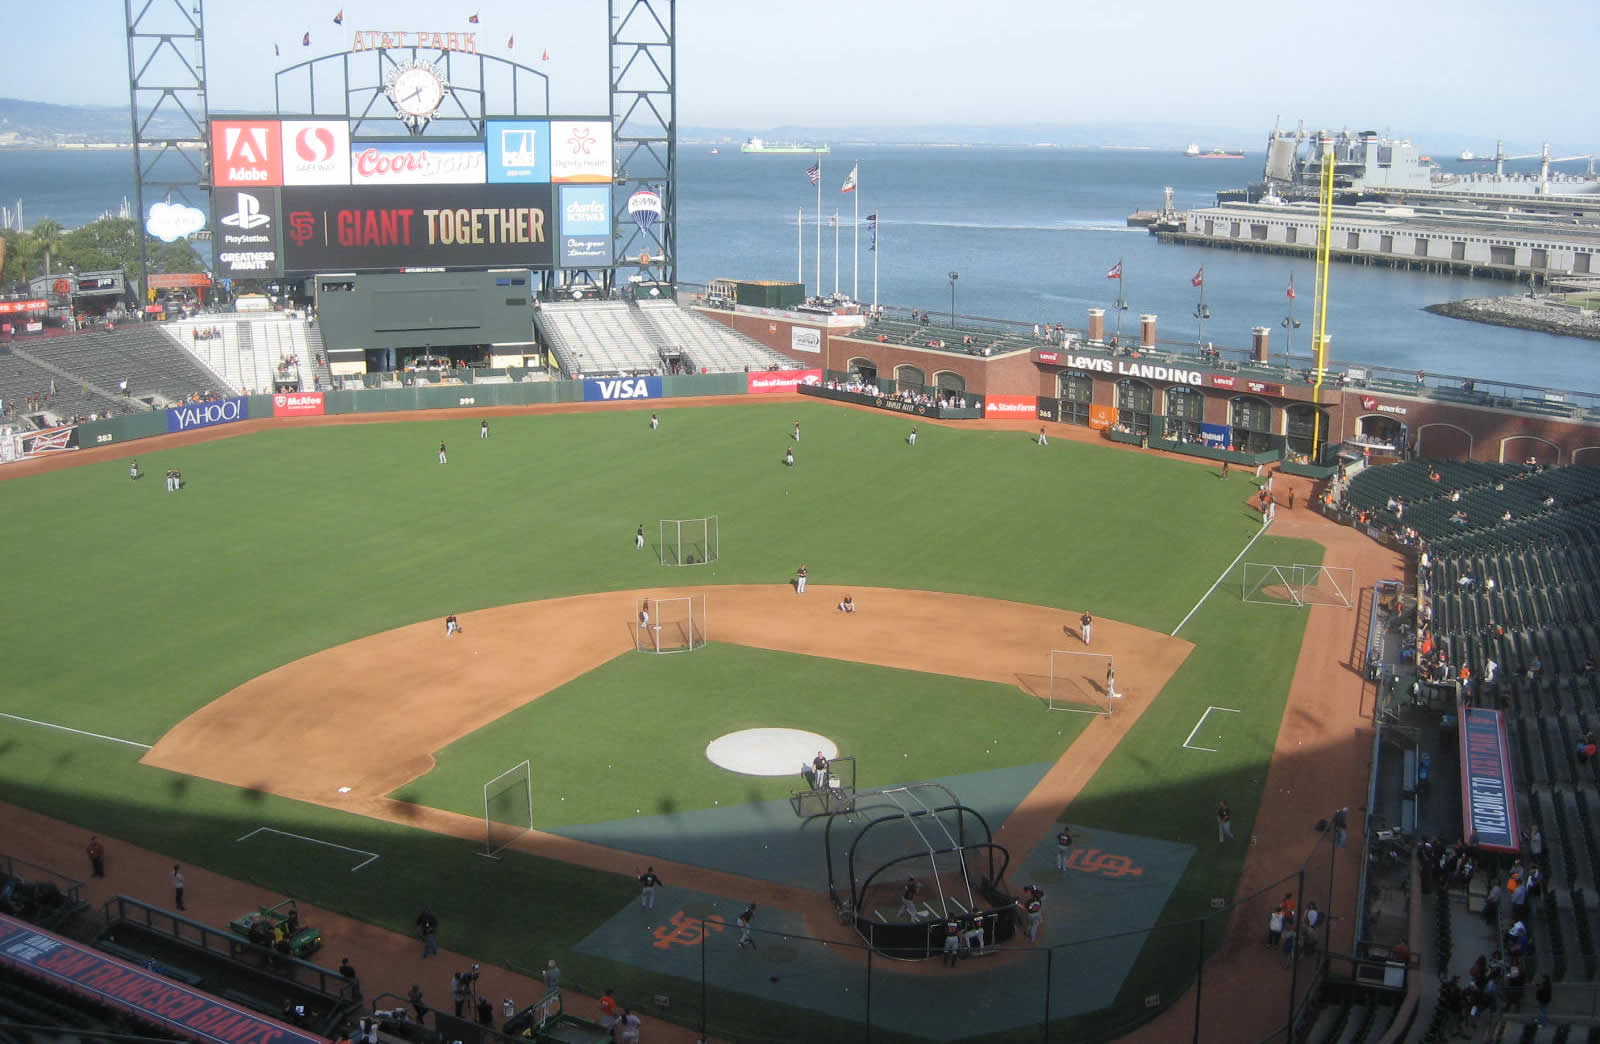 What is your favorite section to sit in at AT&T Park? : r/SFGiants